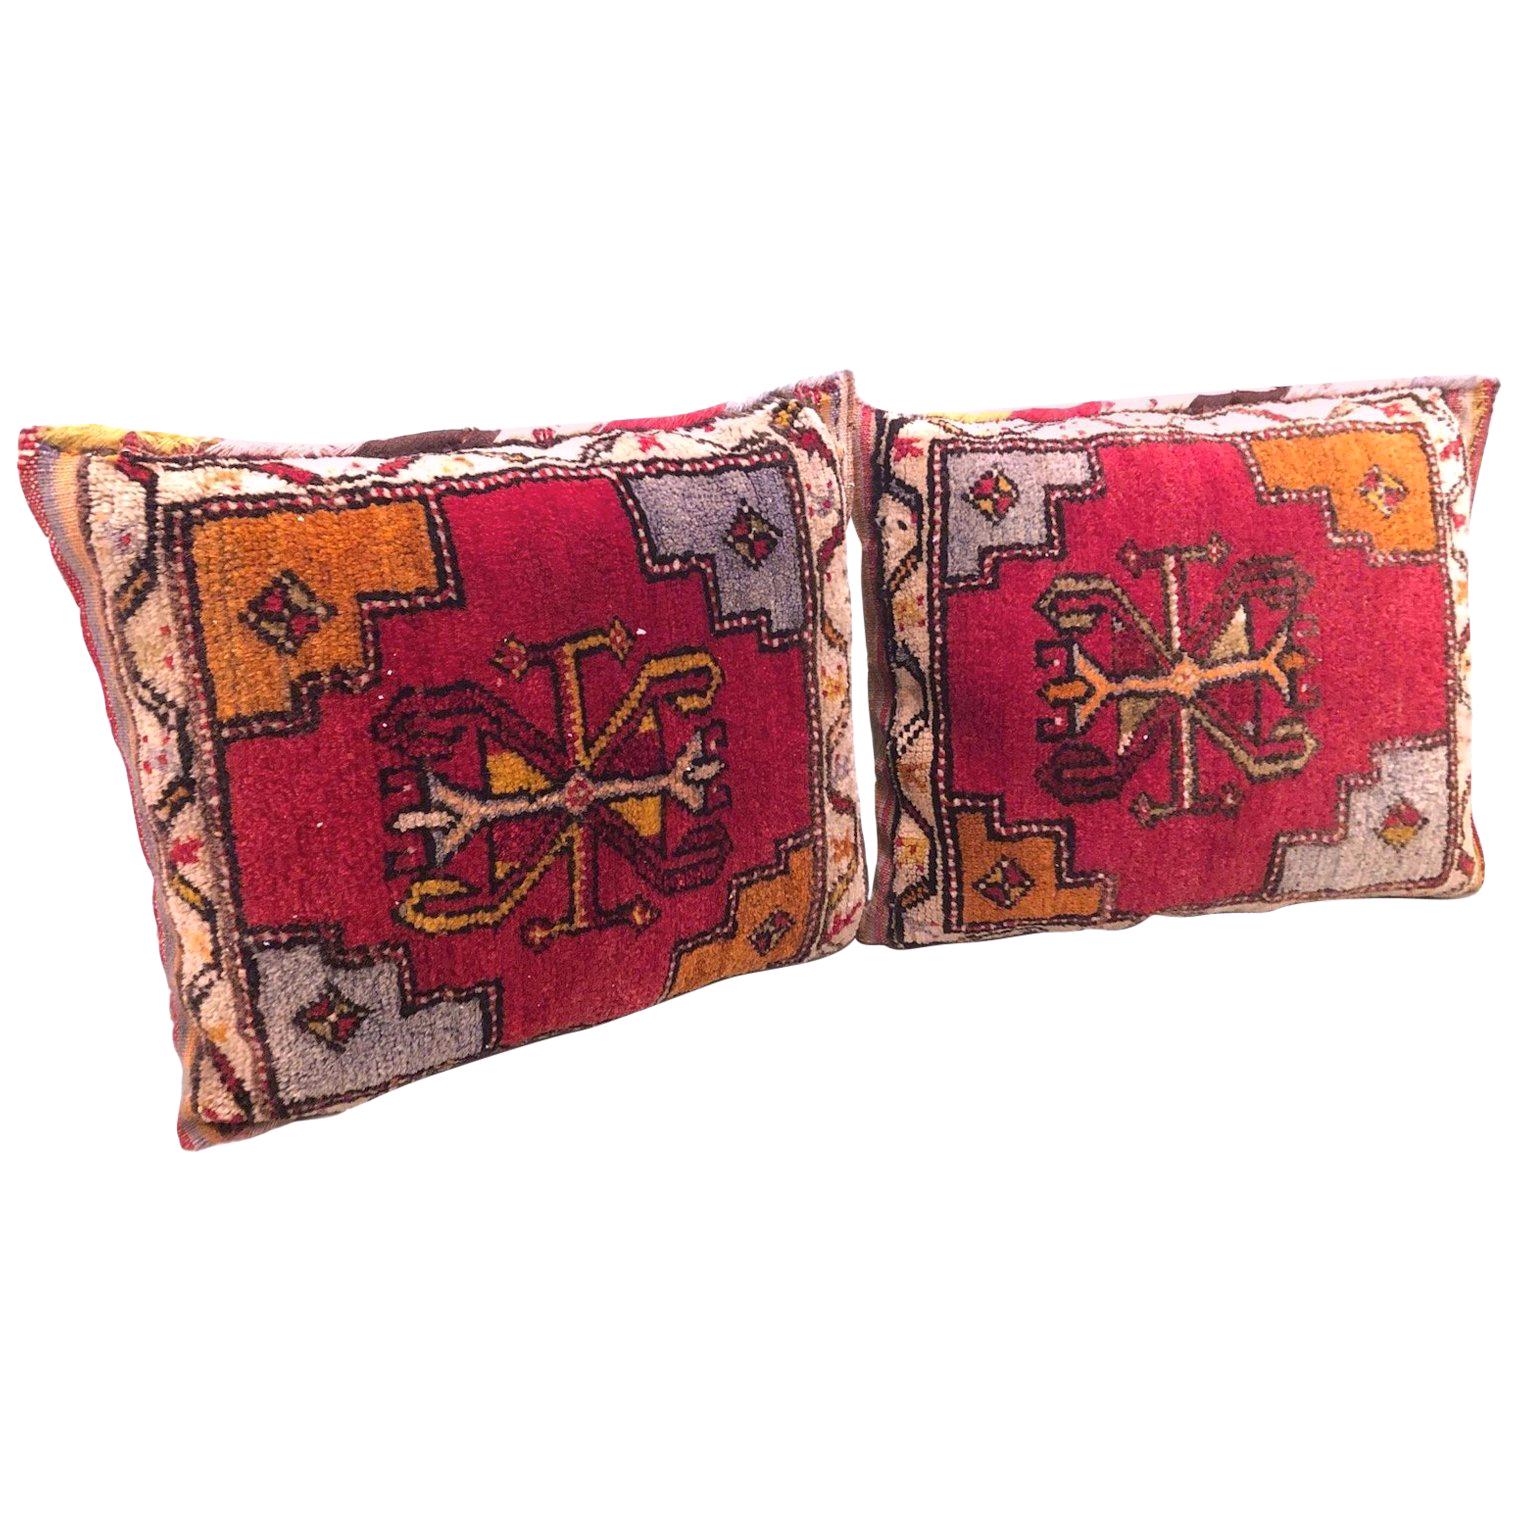 Pair of Gypsy Turkish Oriental Salt Bag or Rug Embroidery Pillows For Sale